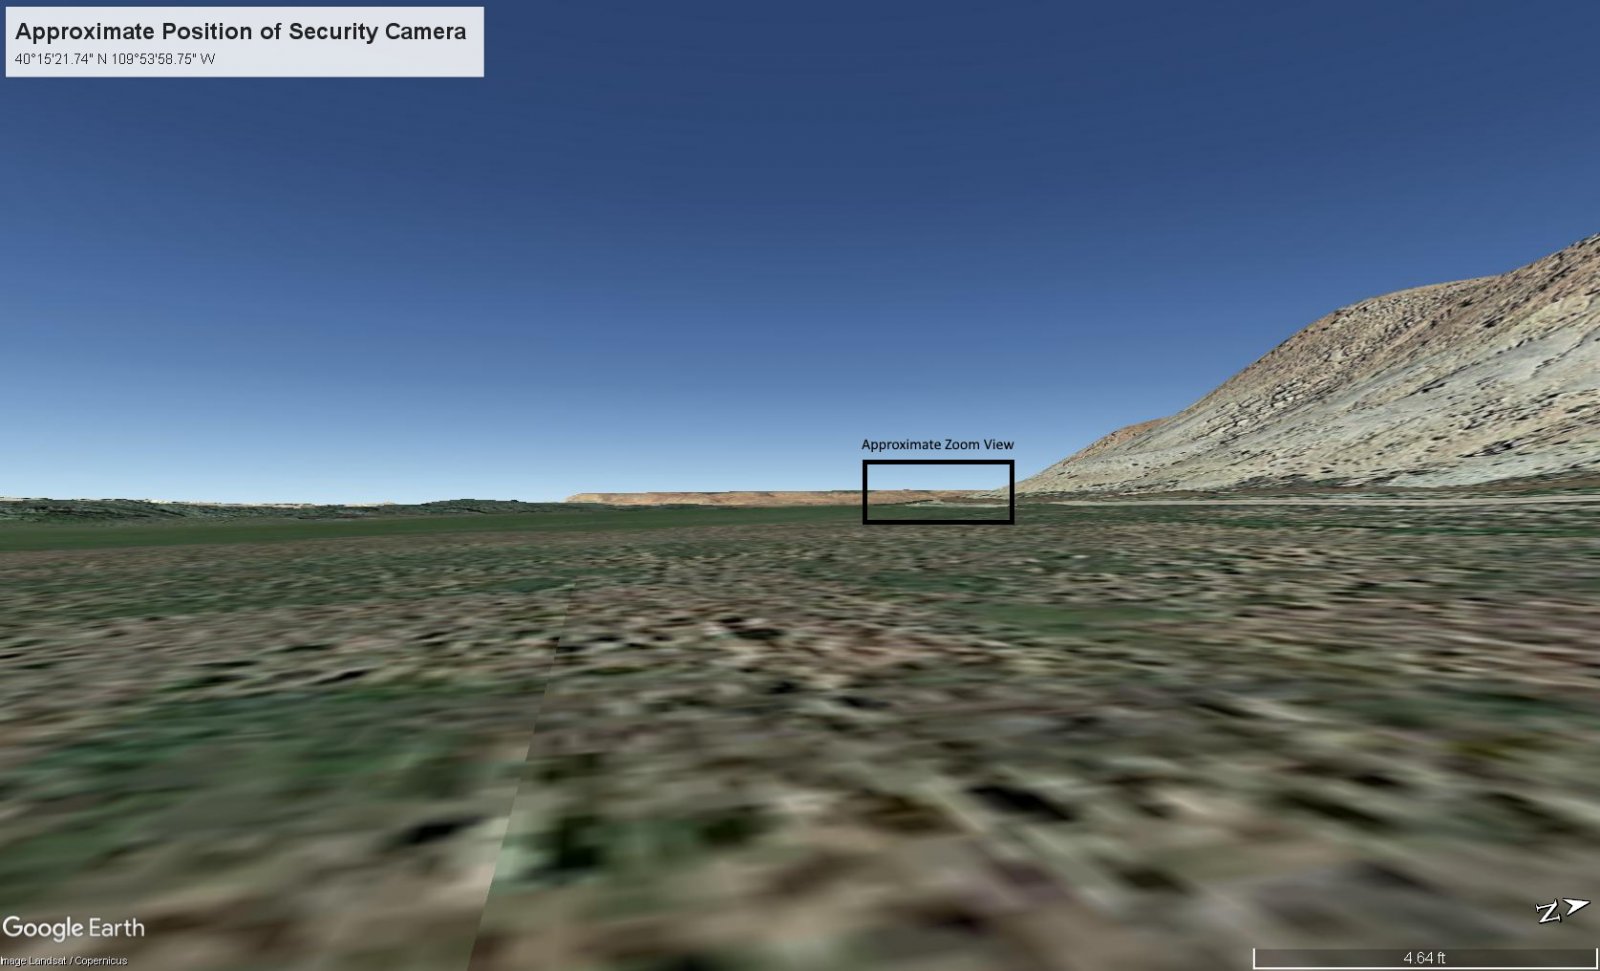 Geolocation of the security camera image in Google Earth, with the approximate location for the zoomed camera image marked. The approximate position of the security camera is 40 degrees, 15 minutes, 21.74 seconds north by 109 degrees, 53 minutes, 58.75 seconds west.